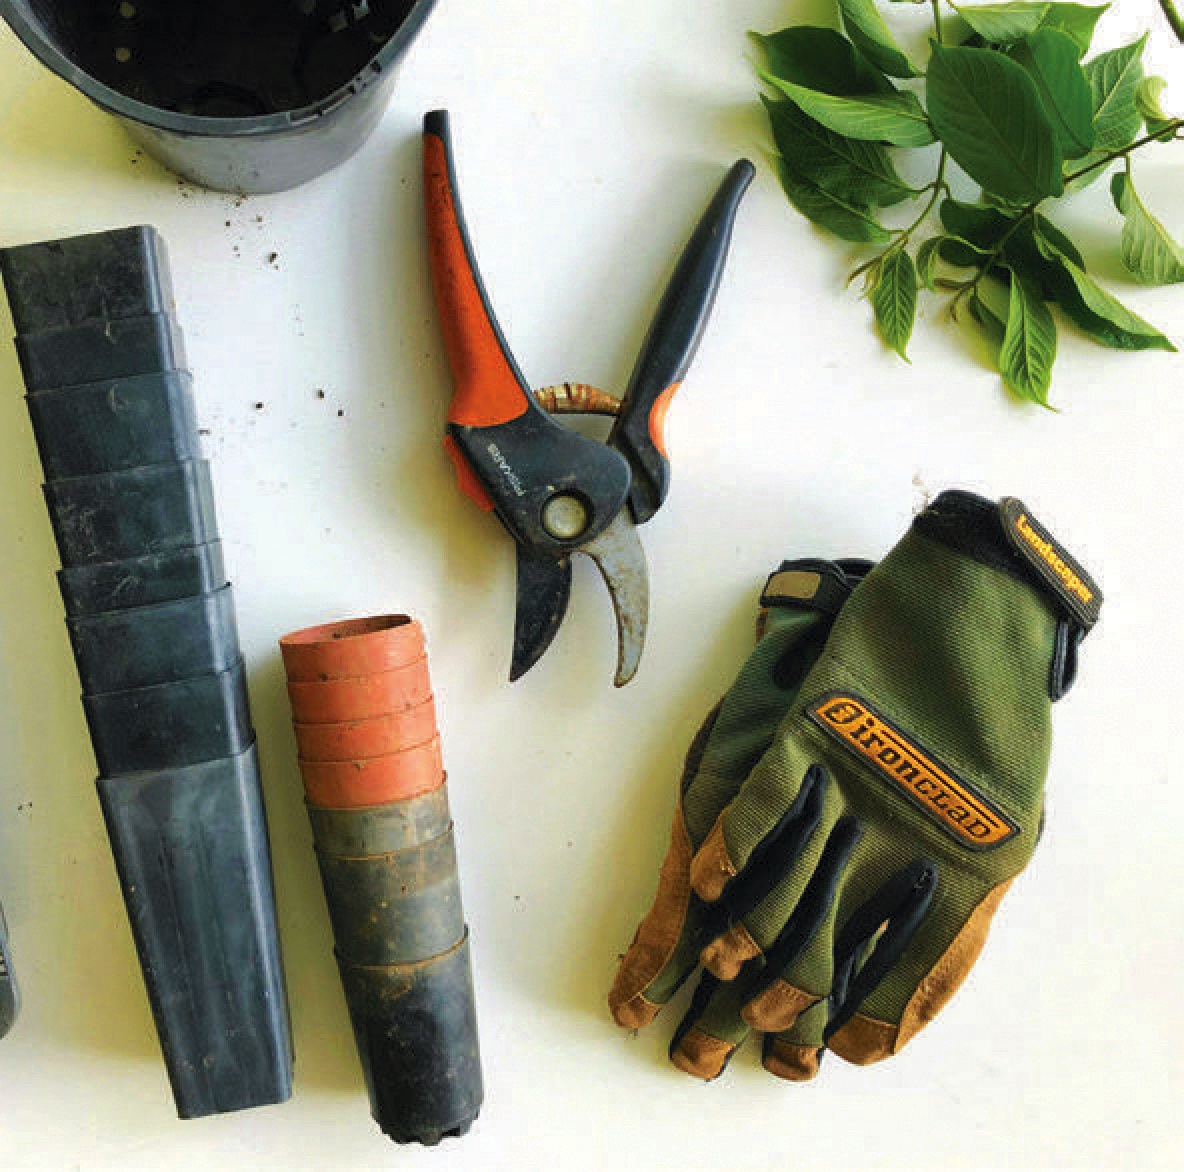 gardening tools laid out on a table